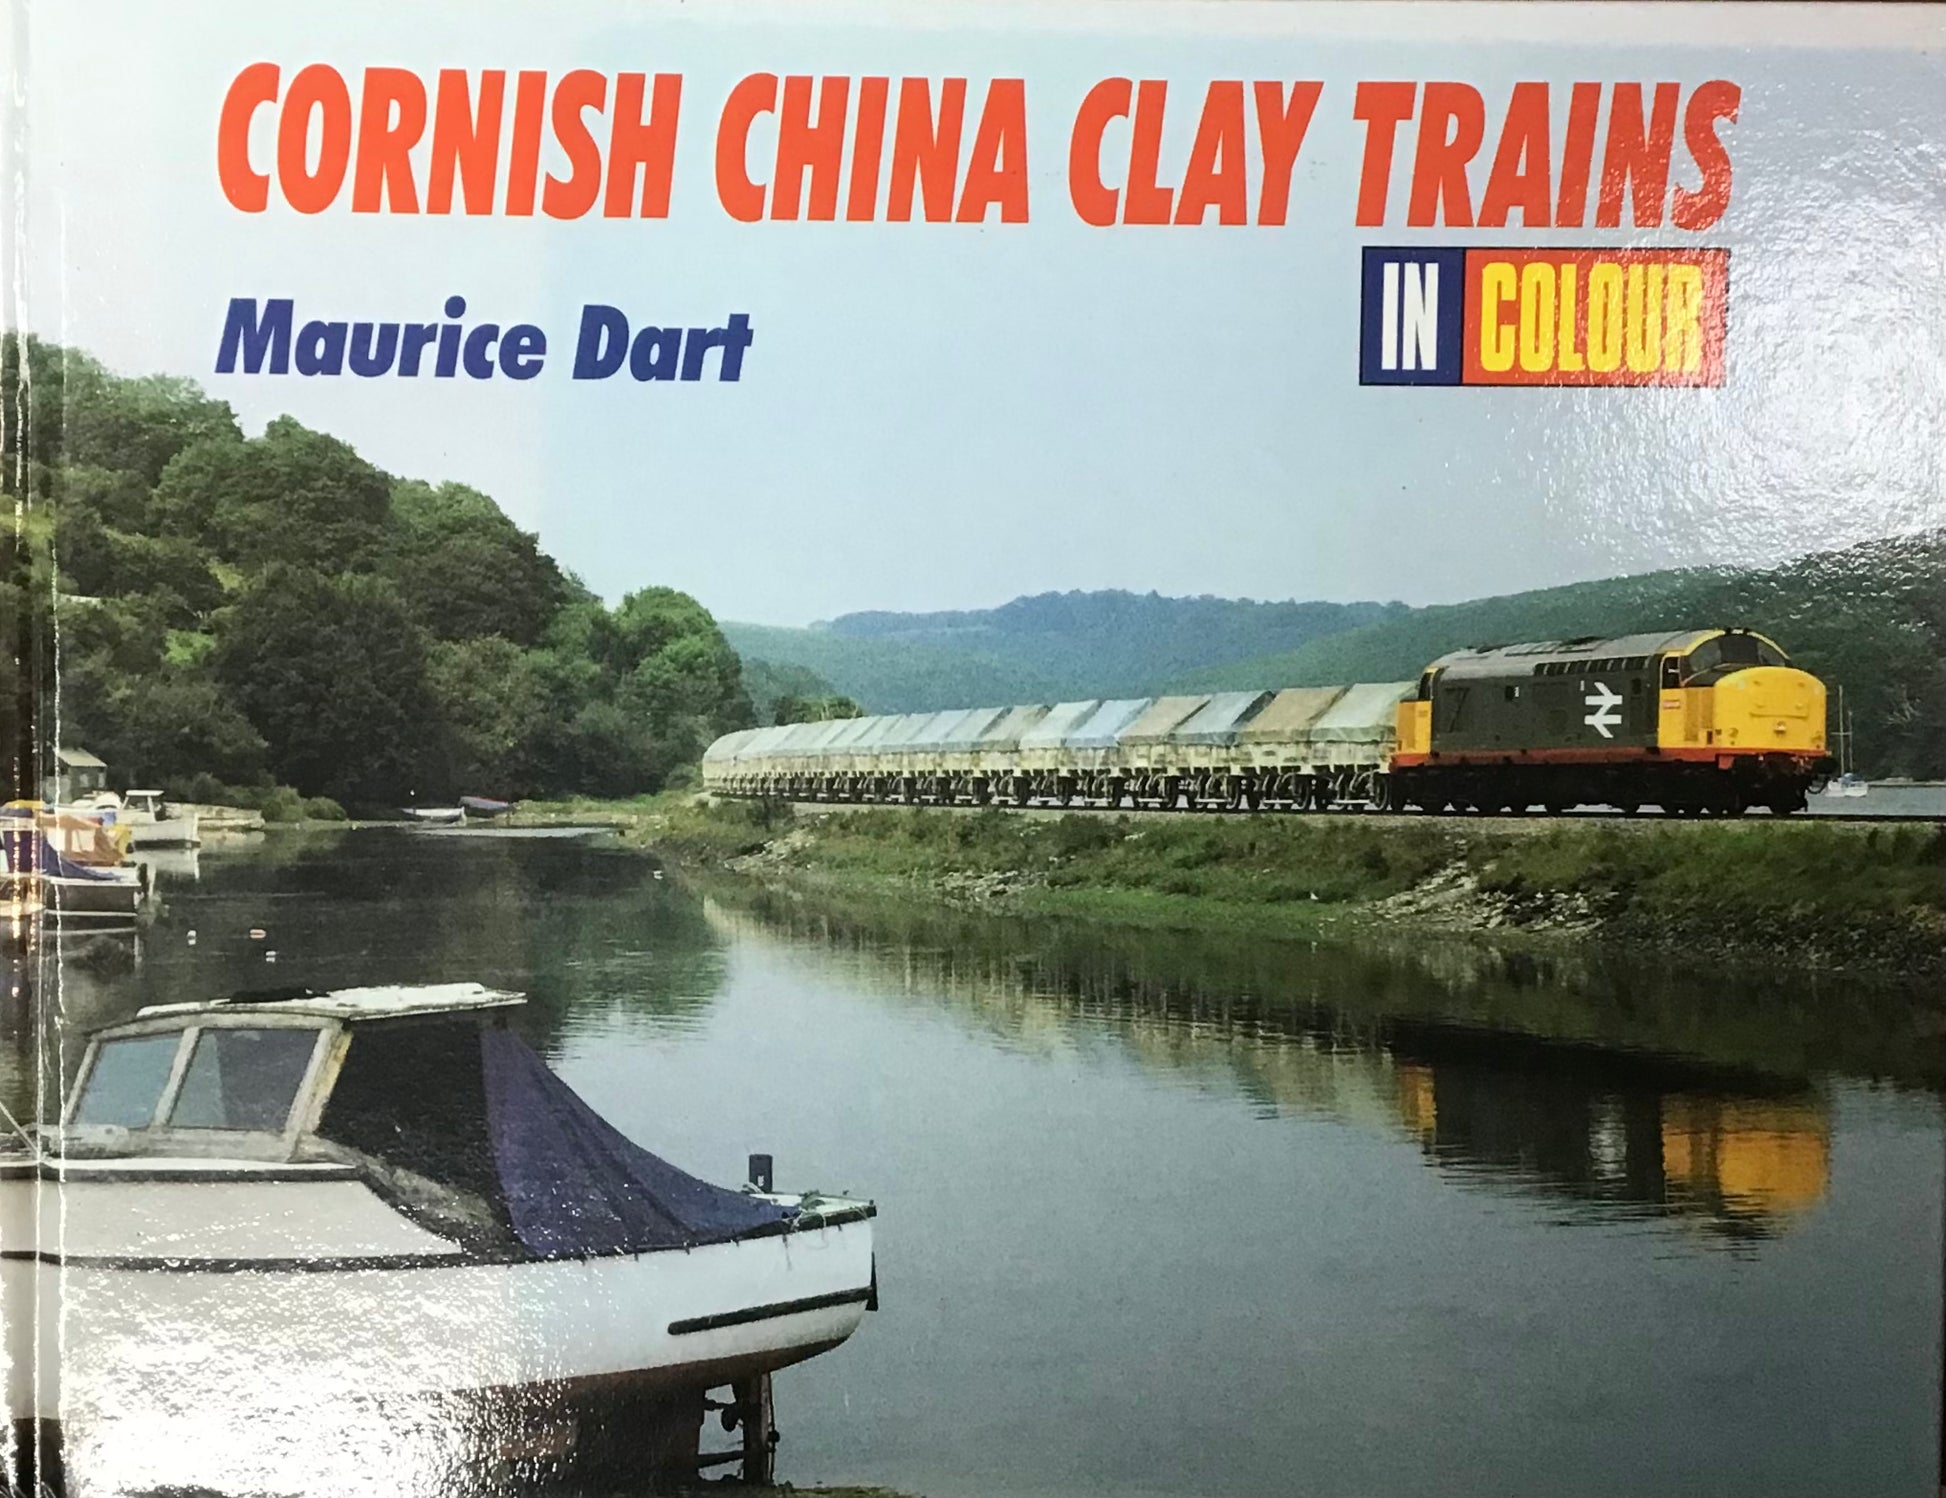 Cornish China Clay Trains In Colour by Maurice Dart - Chester Model Centre